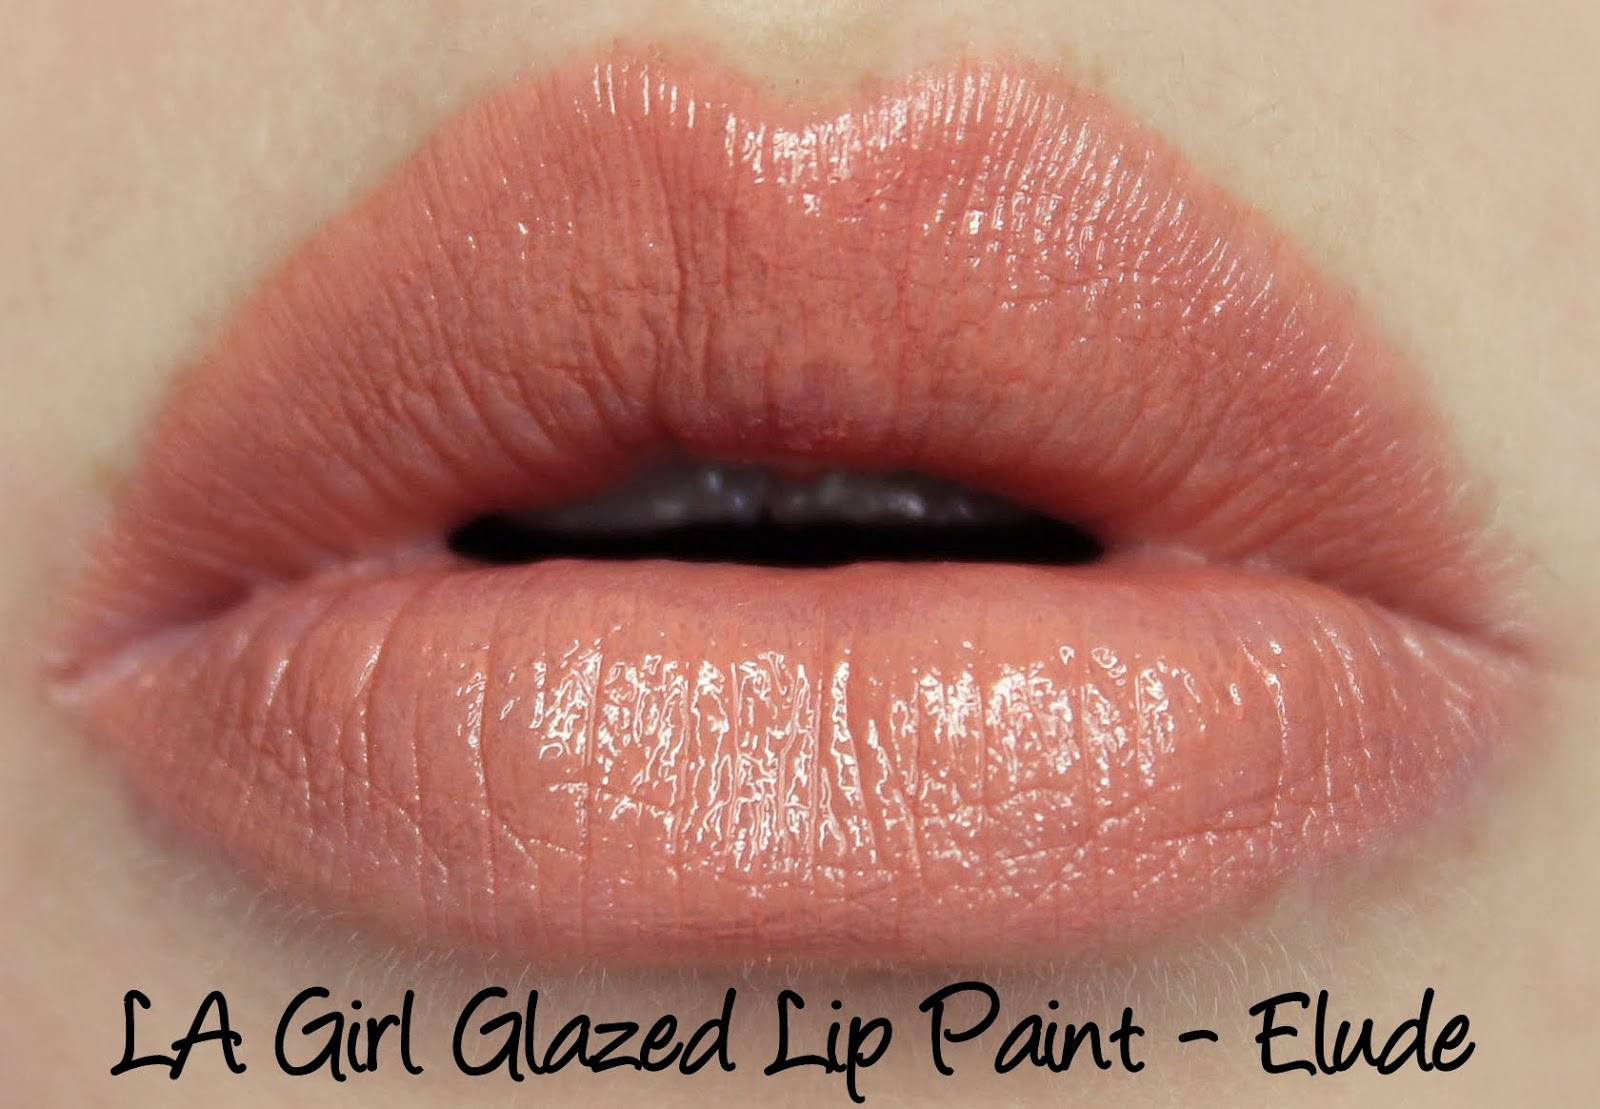 LA Girl Glazed Lip Paint - Elude Swatches & Review